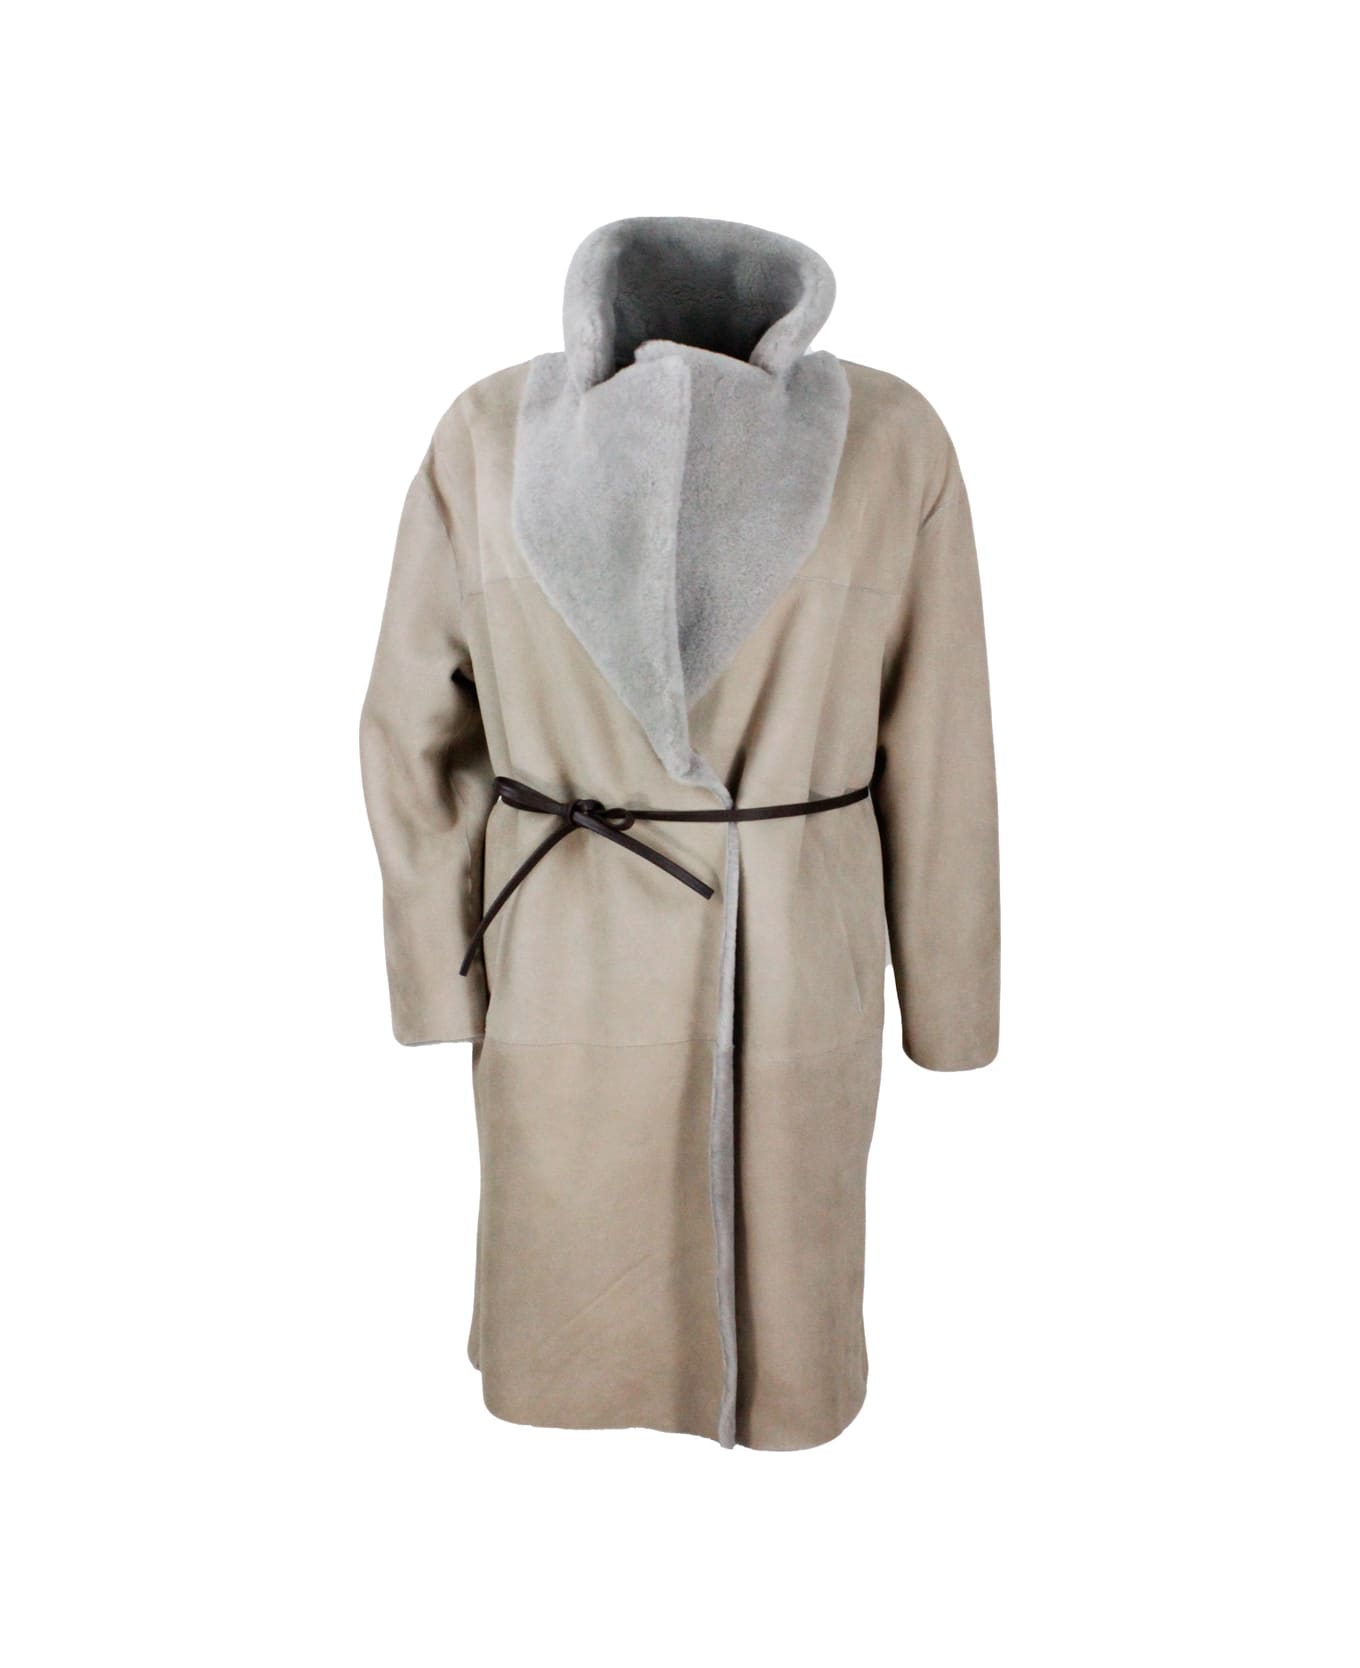 Fabiana Filippi Long Coat In Reversible Shearling Sheepskin With Belt At The Waist And One Button Closure - Nut